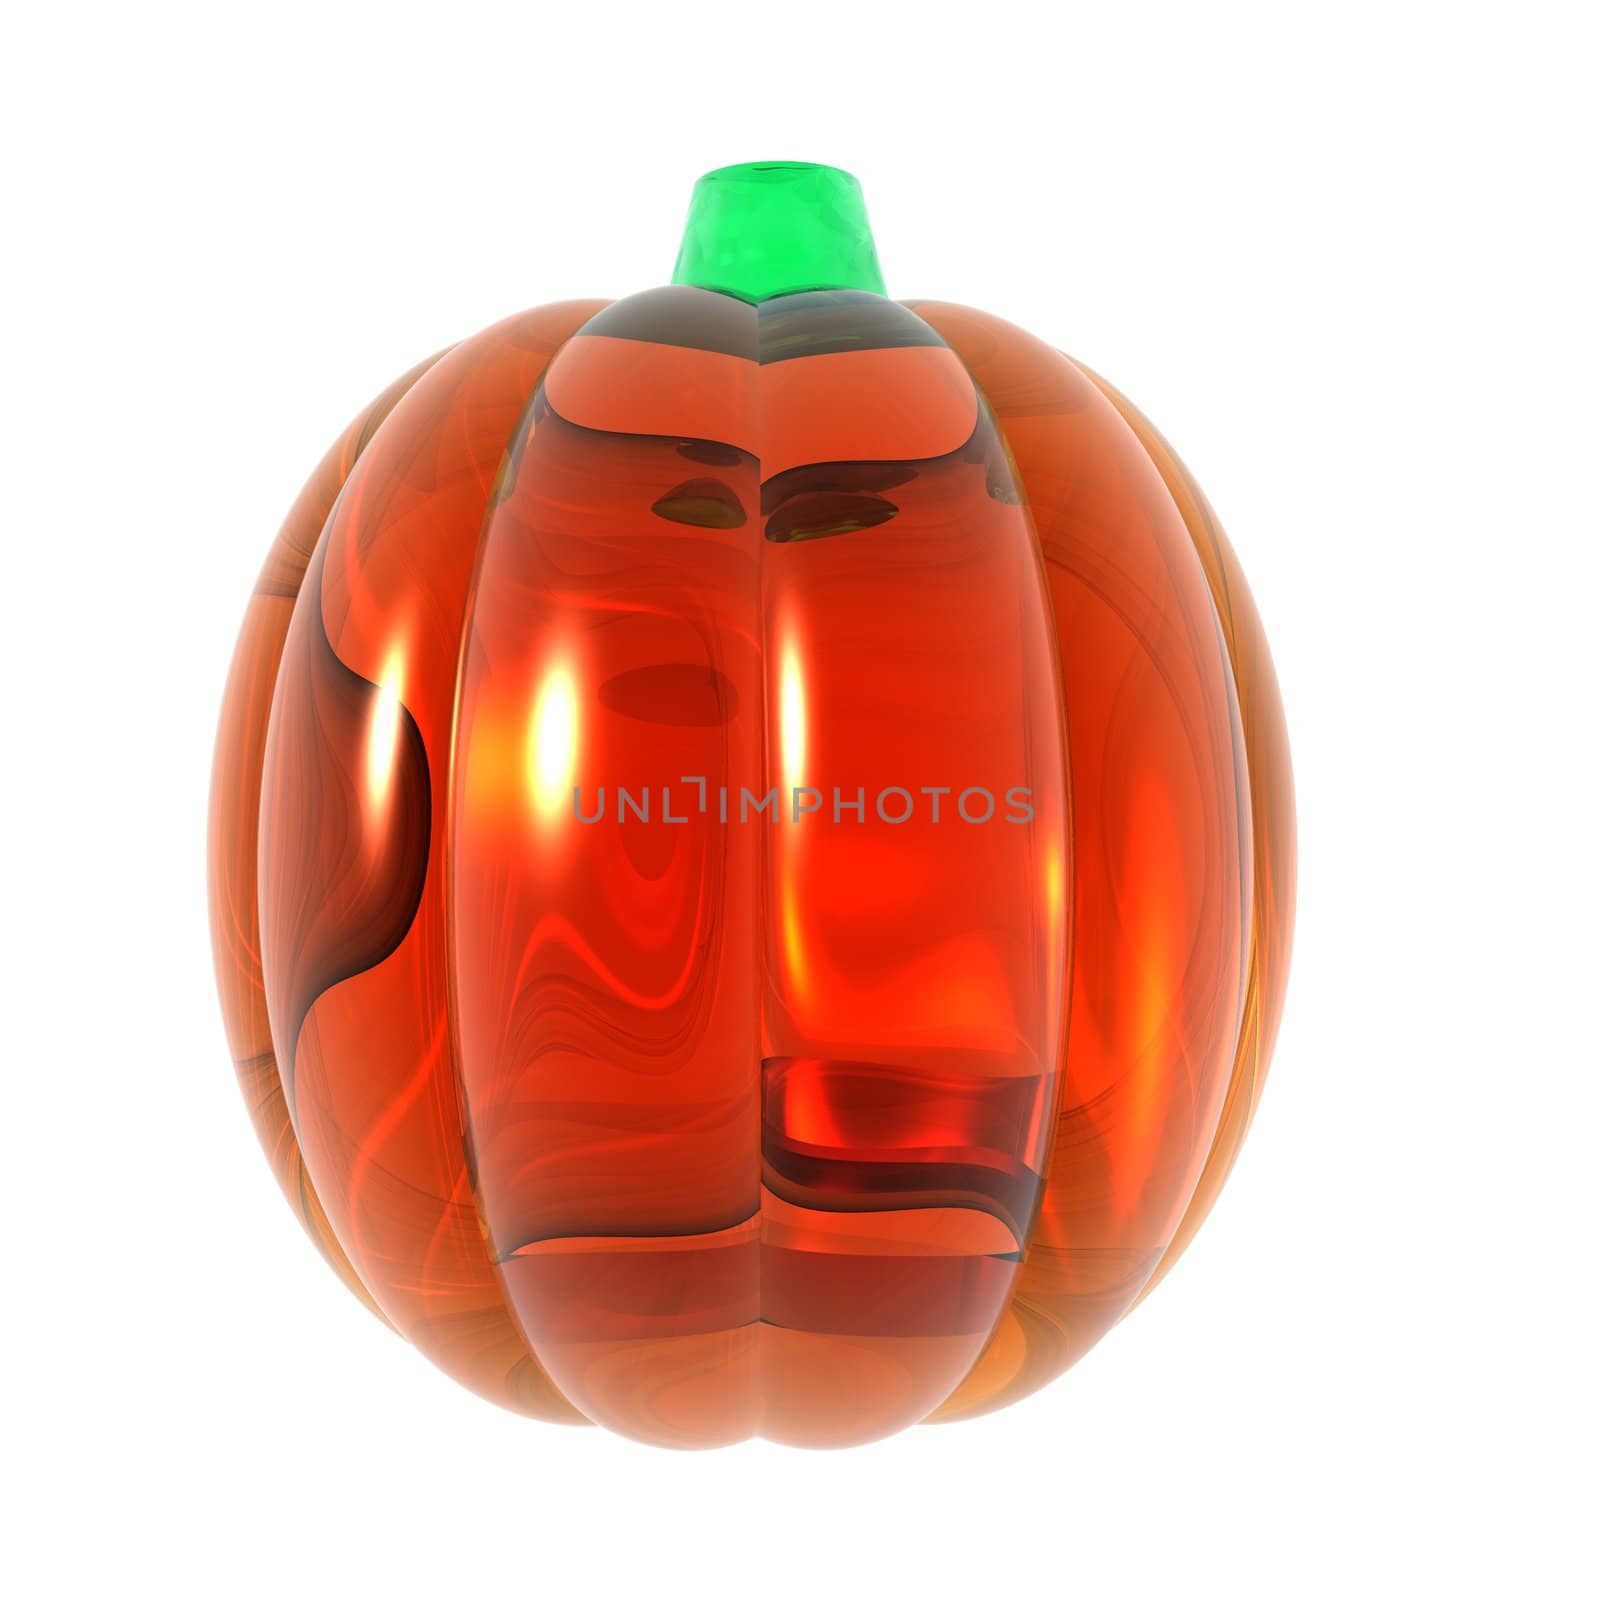 An illustration of a pumpkin made of glass on a white background.